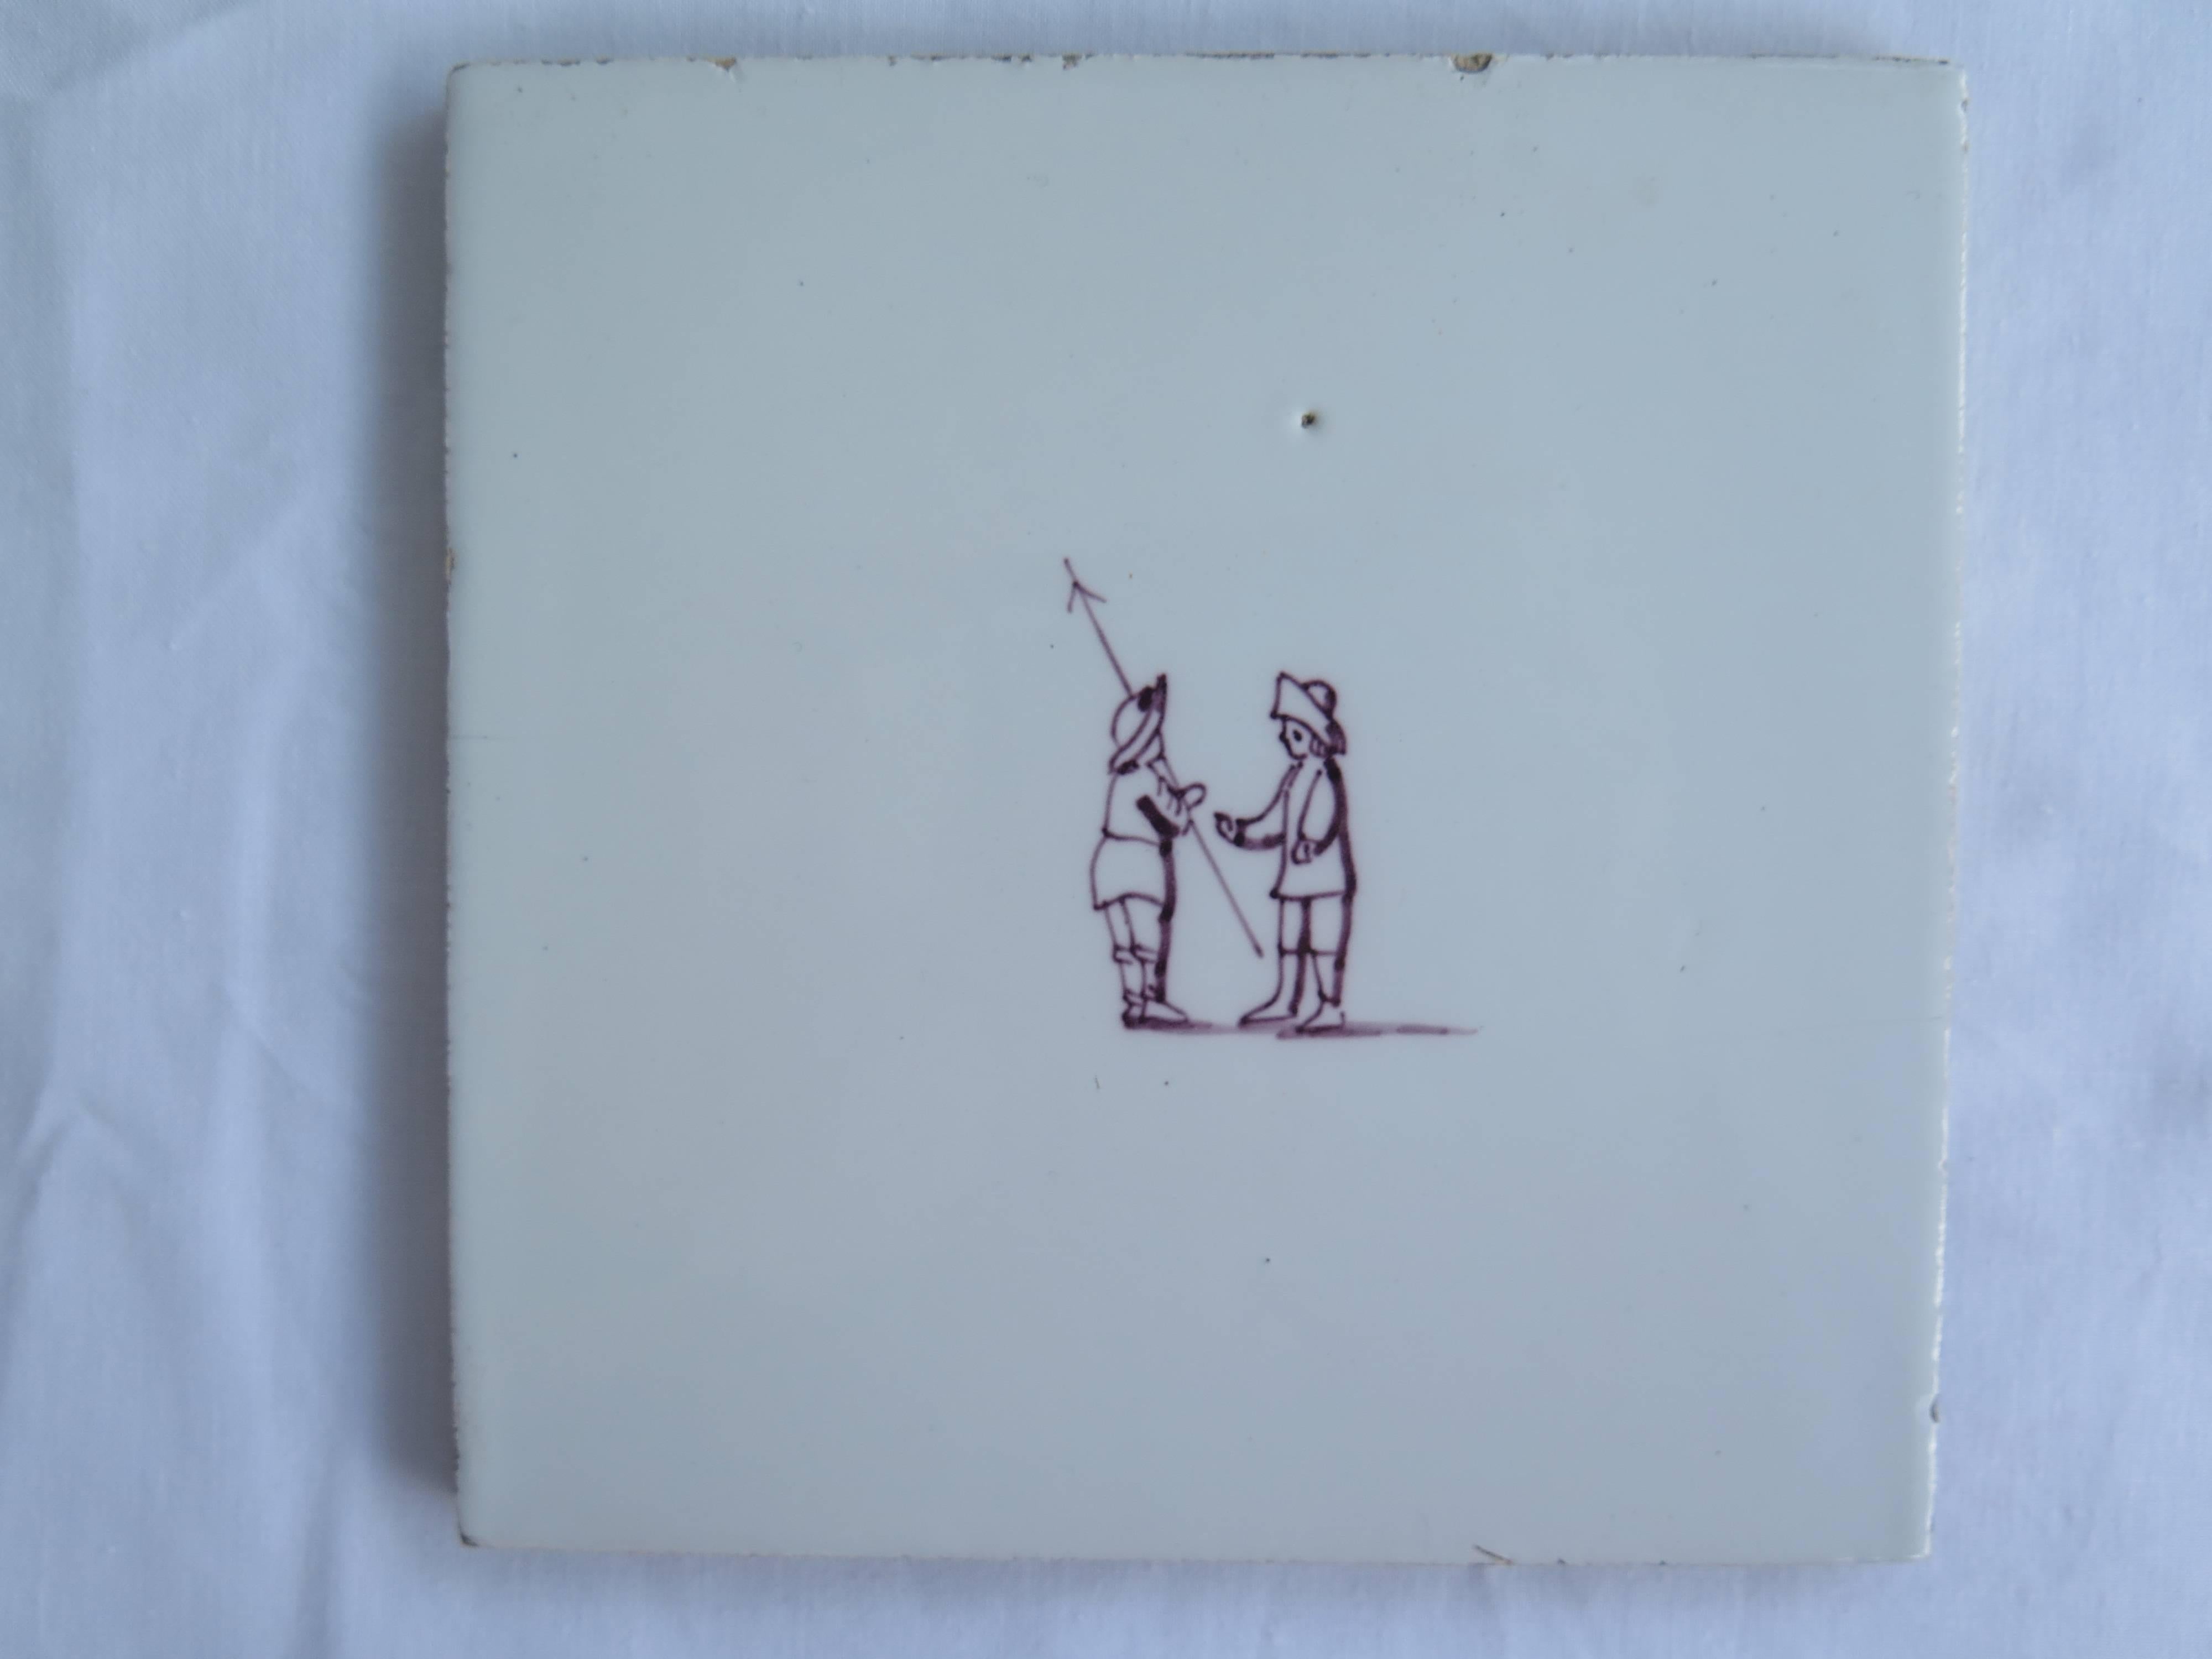 Glazed Seven Delft Ceramic Manganese Wall Tiles Hand painted Children's Games